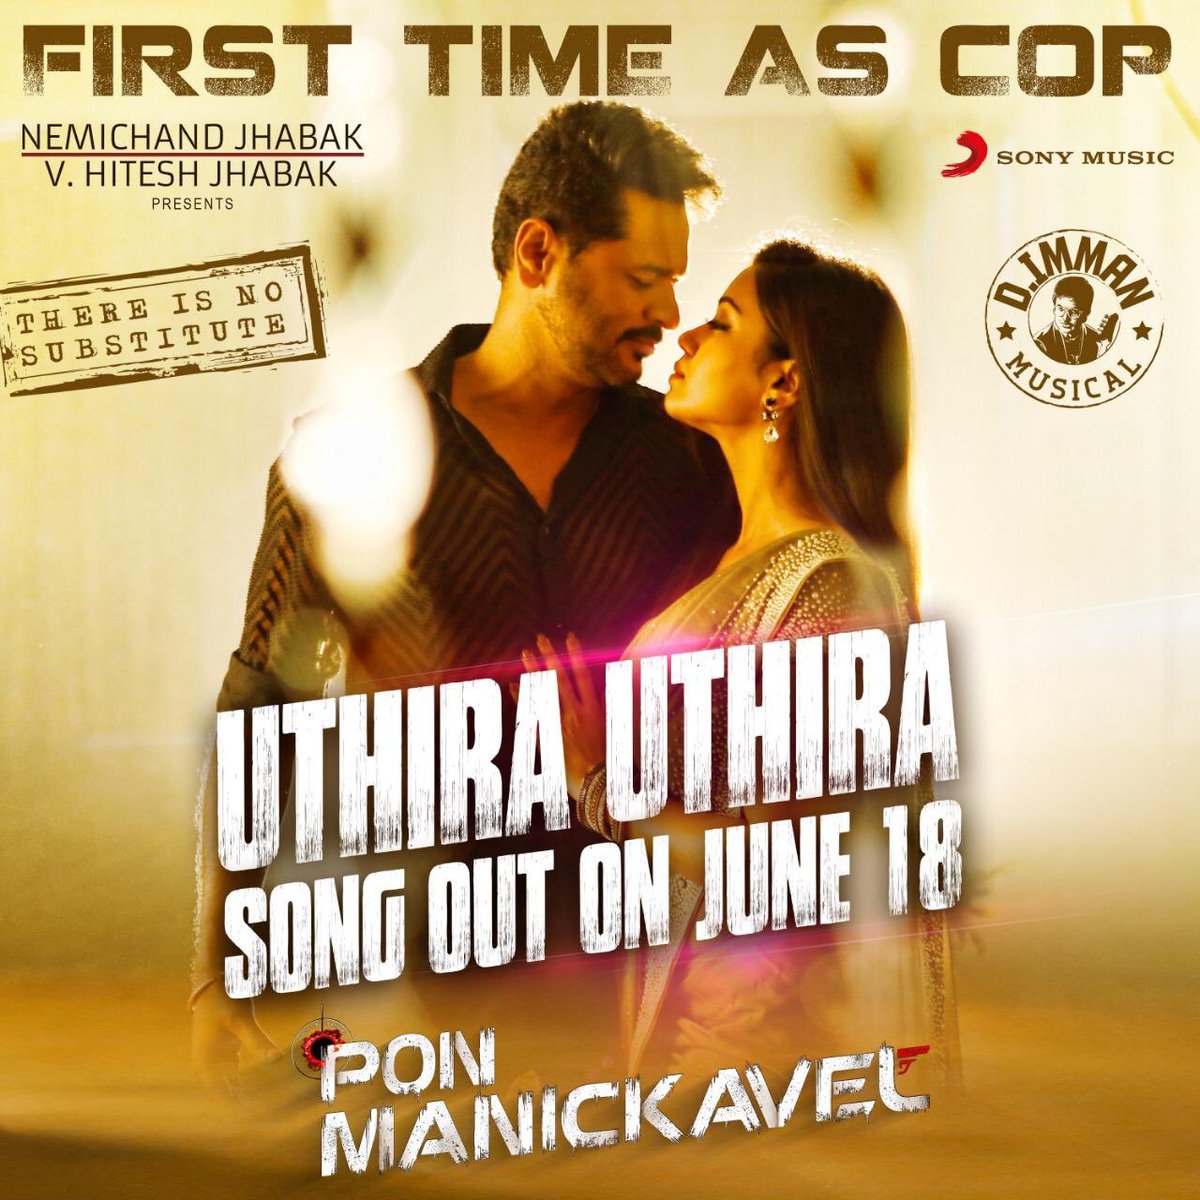 A Romantic love song #UthiraUthira with scintillating vocals of @shreyaghoshal and #SreekanthHariharan from @PDdancing #NivethaPethuraj Starrer #Ponmanikavel Coming on June 18th! From @madhankarky lyrical desk! Produced by @JabaksMovies and directed by @acmugil Praise God!